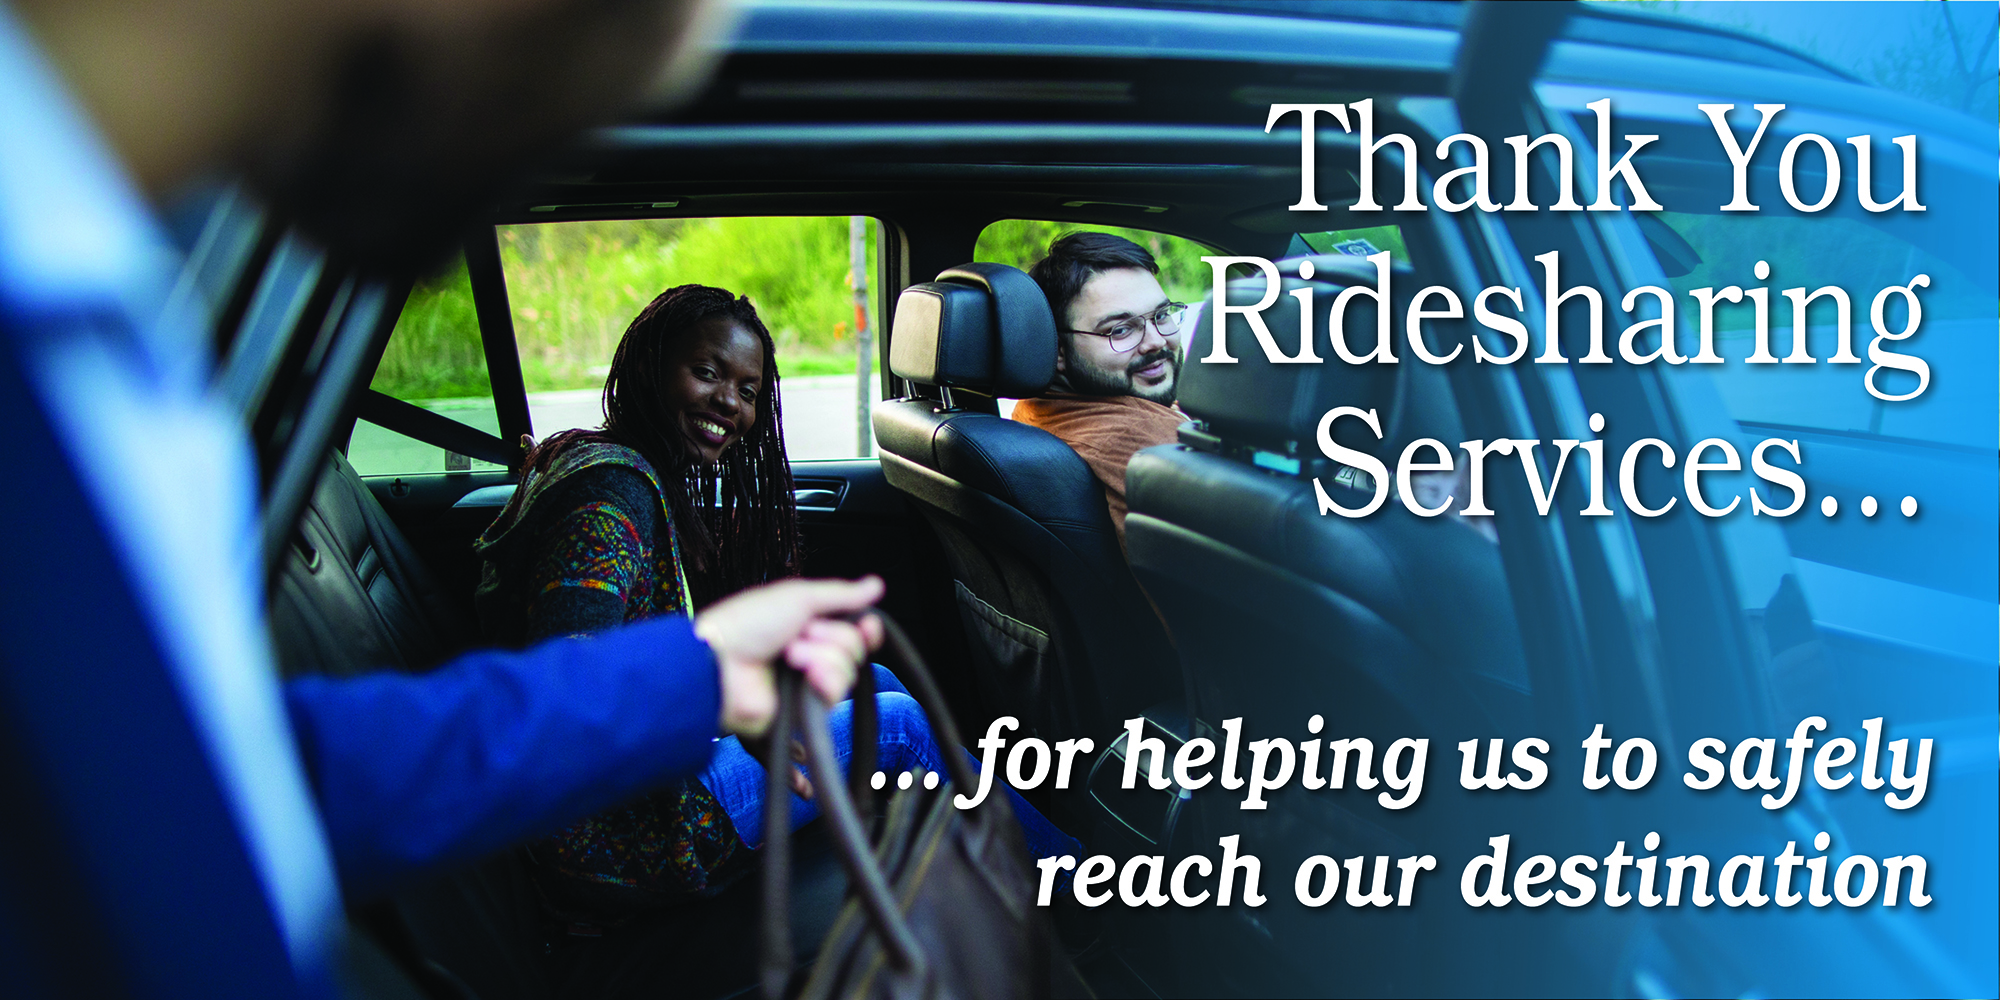 Thank you ride sharing services for helping us to safely reach our destinations